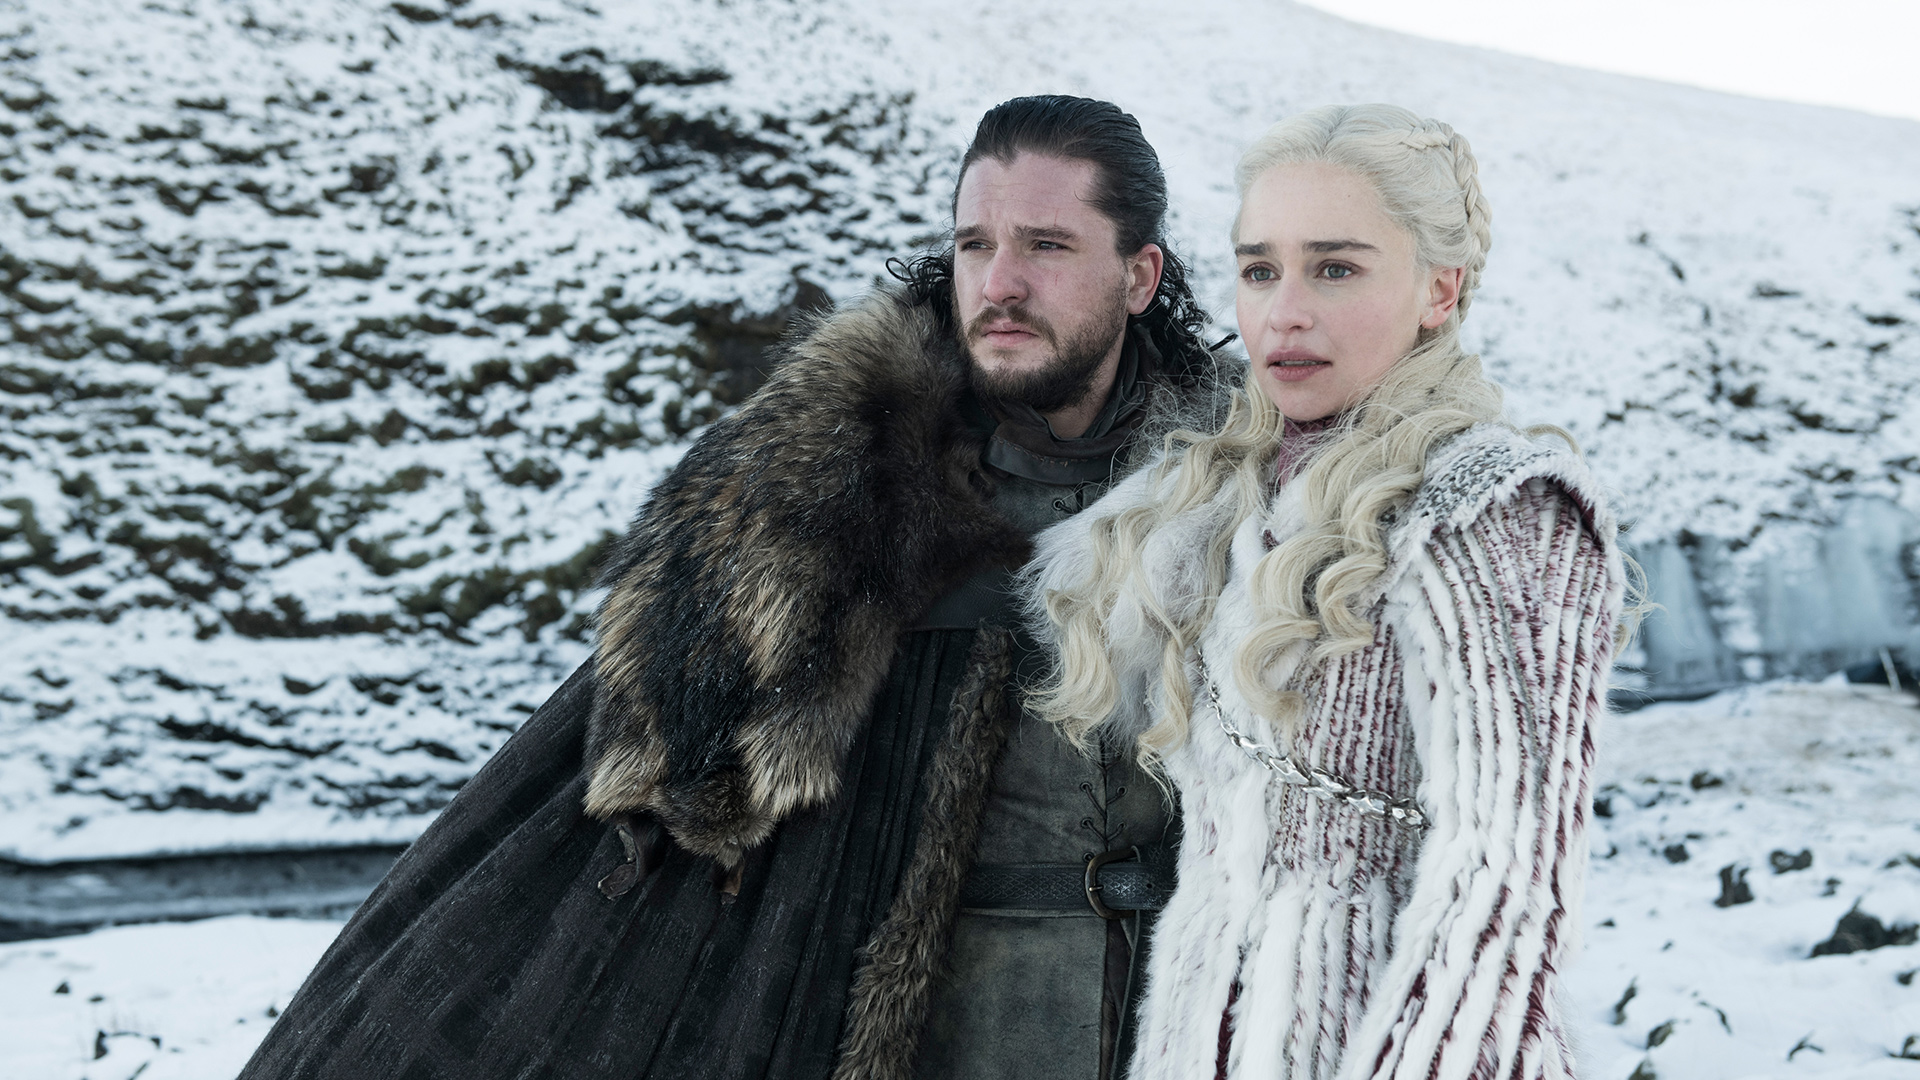 Game of Thrones: S8 E1 "Winterfell" review: Memorable, but not perfect